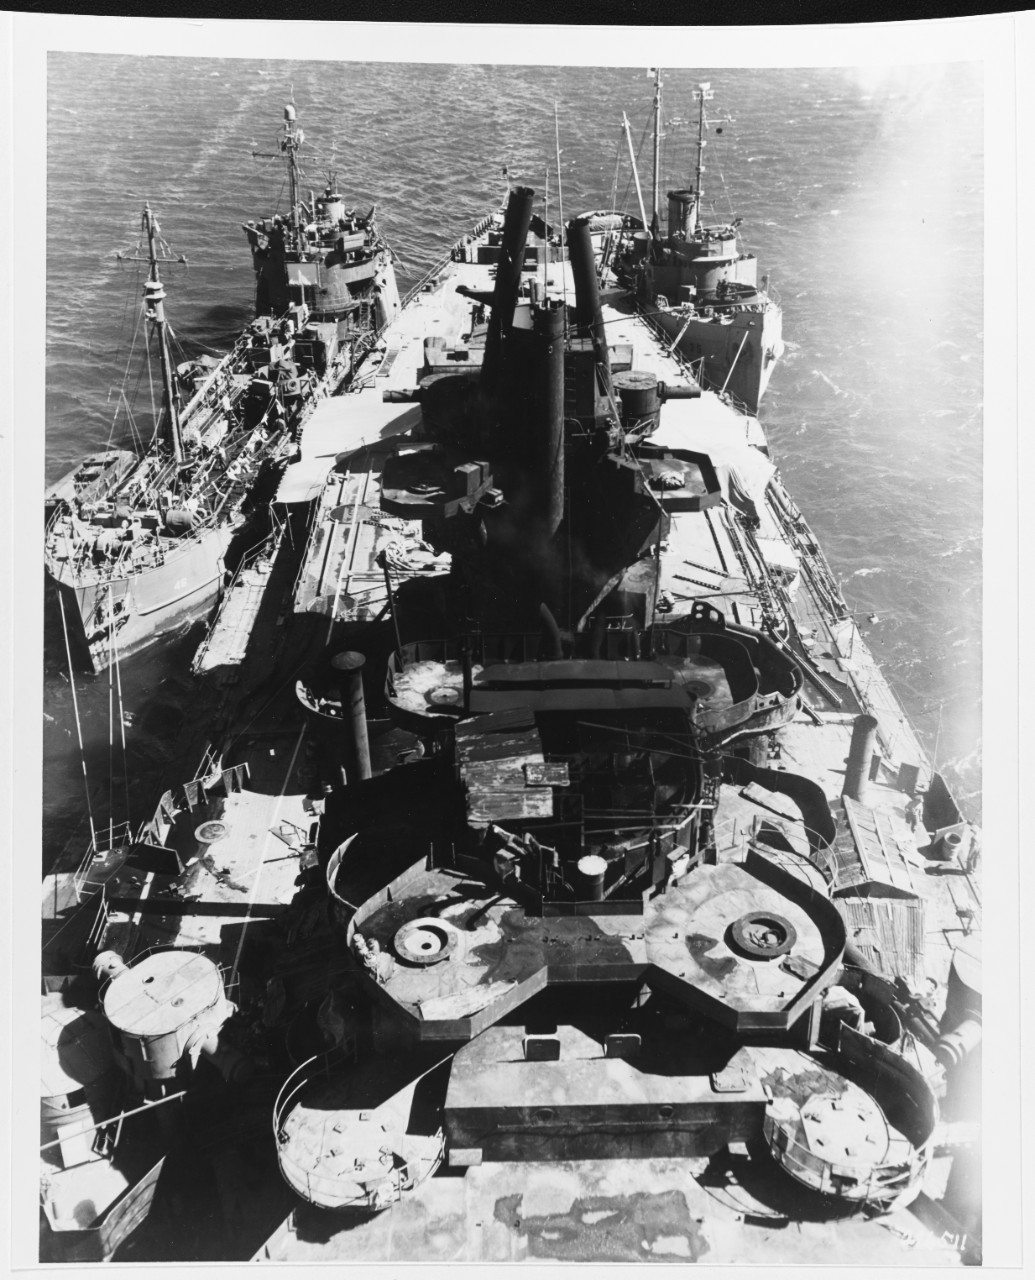 NAGATO, Japanese BB, 1919.  October 12, 1945. USS WAUPACA (AOG-46) is at left, and USS ATR-35 is at right